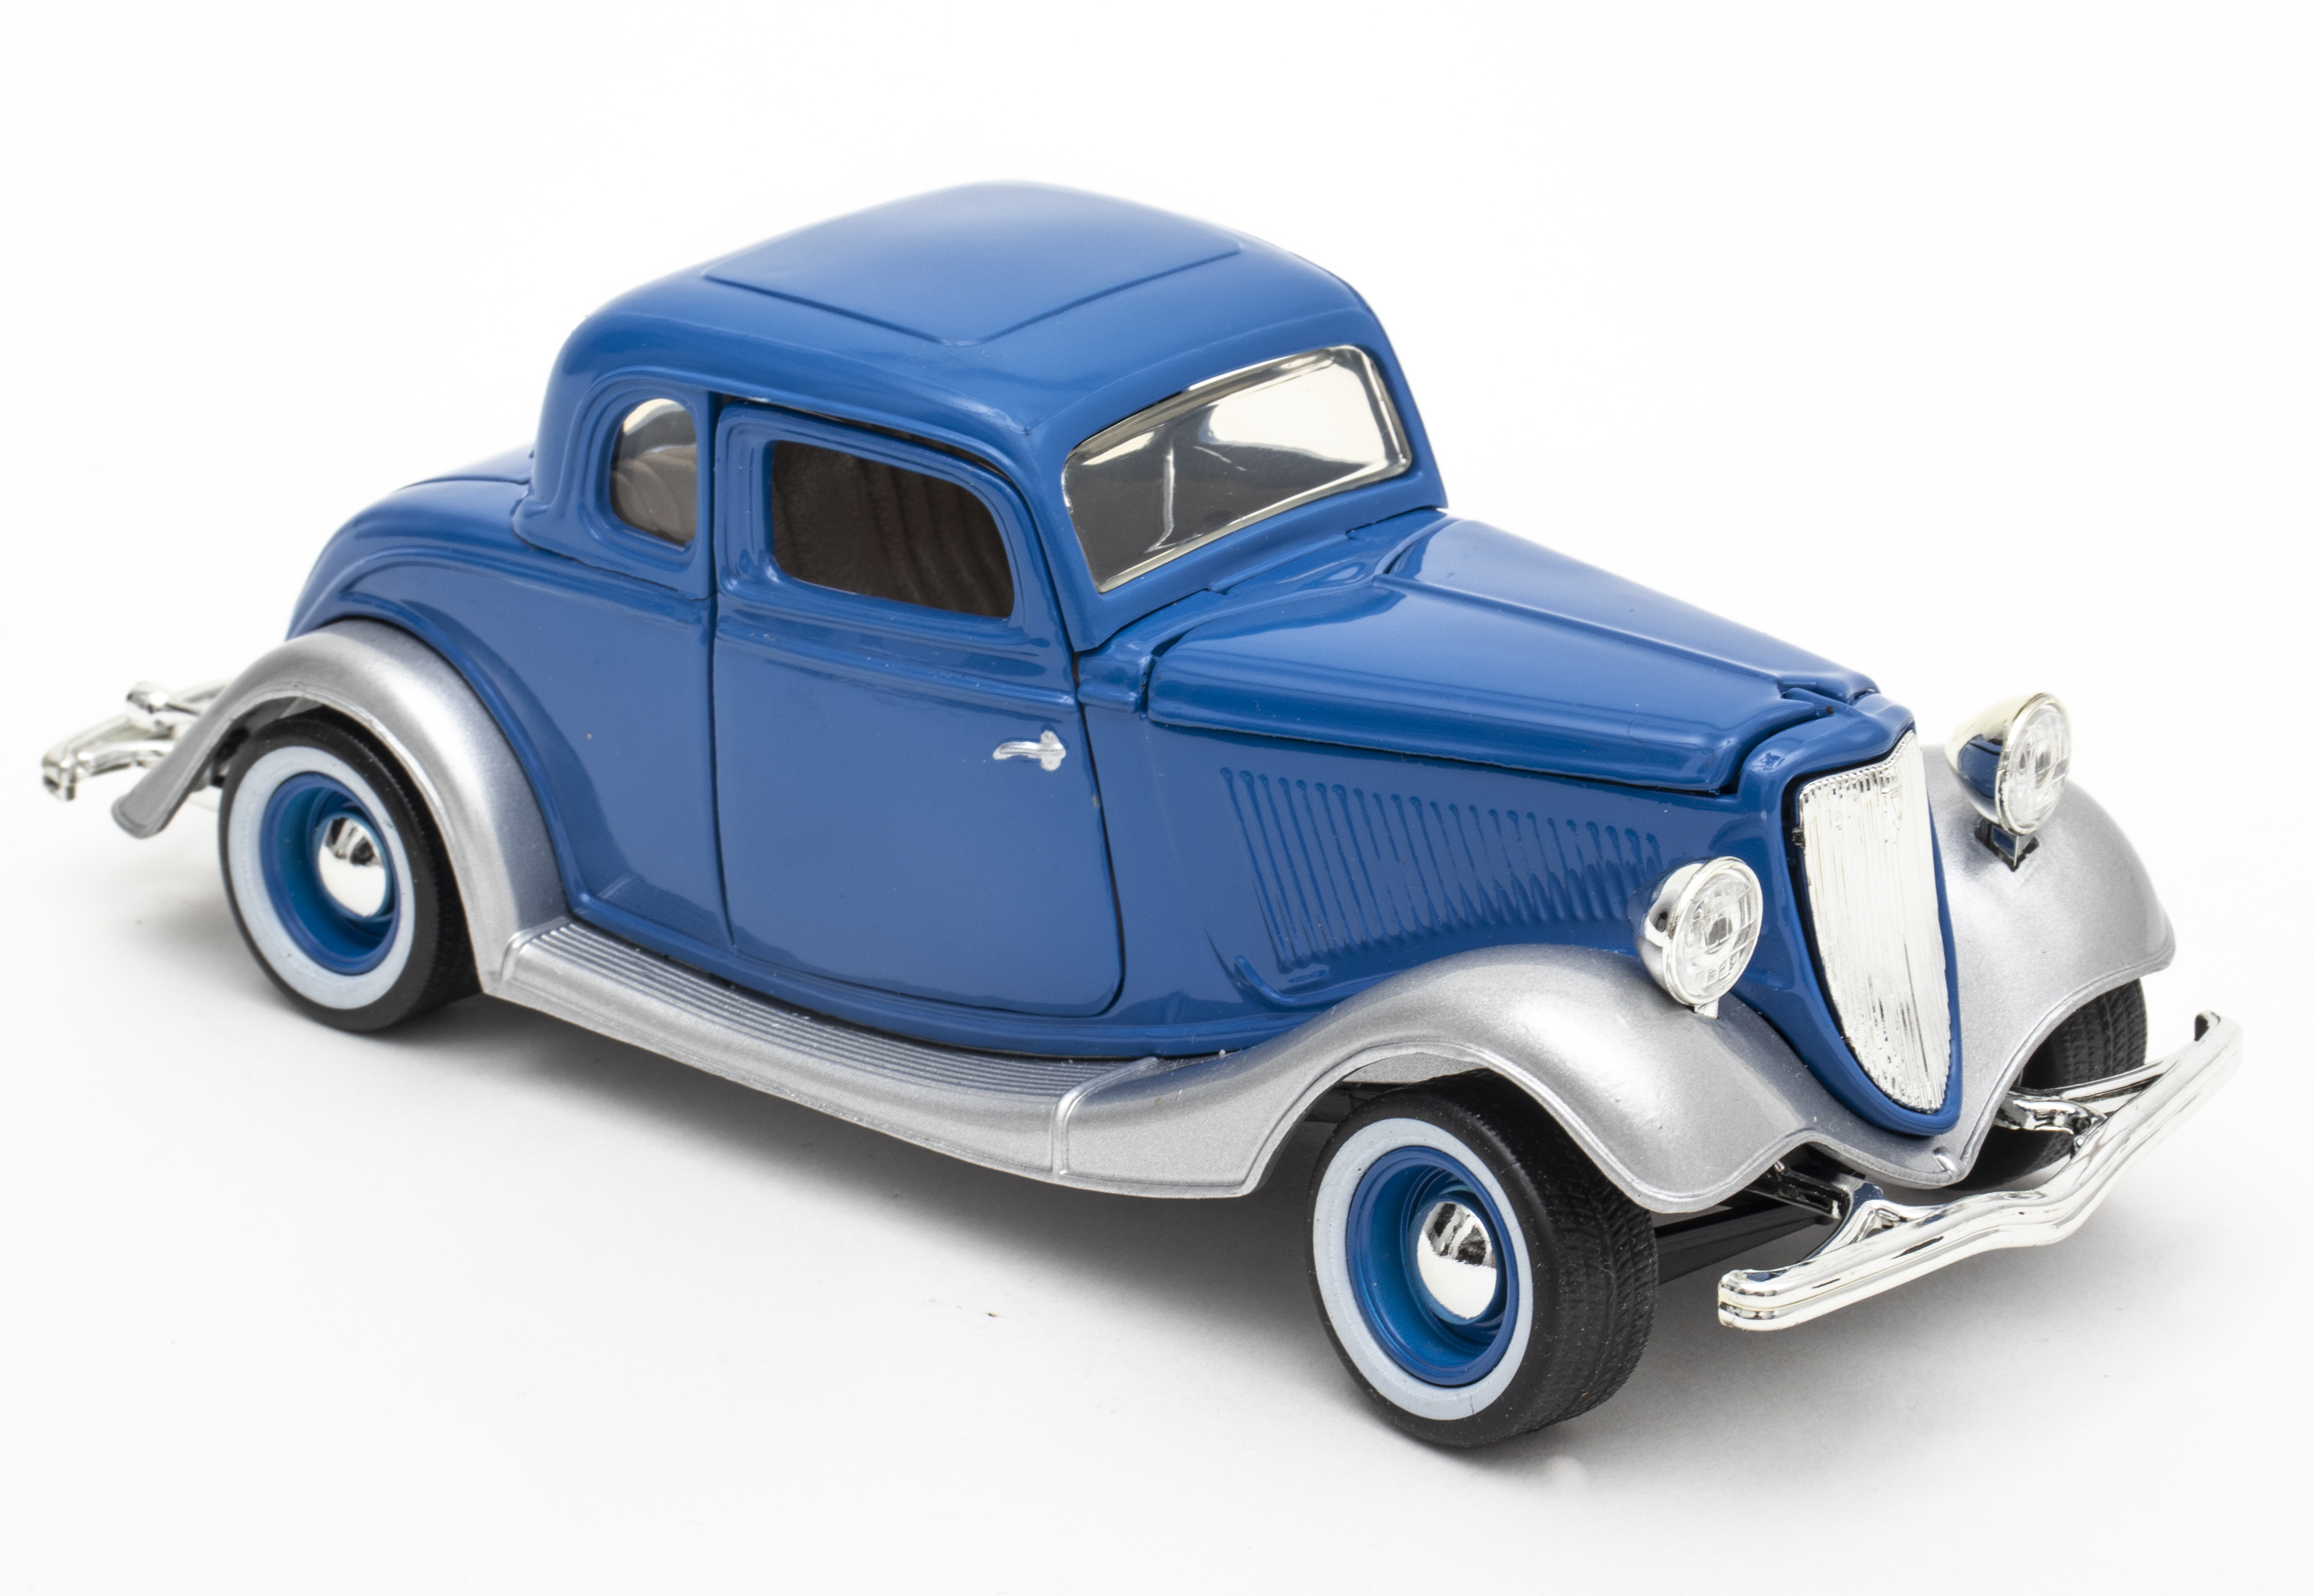 1934 FORD COUPE DIE CAST TOY CAR 3c4470